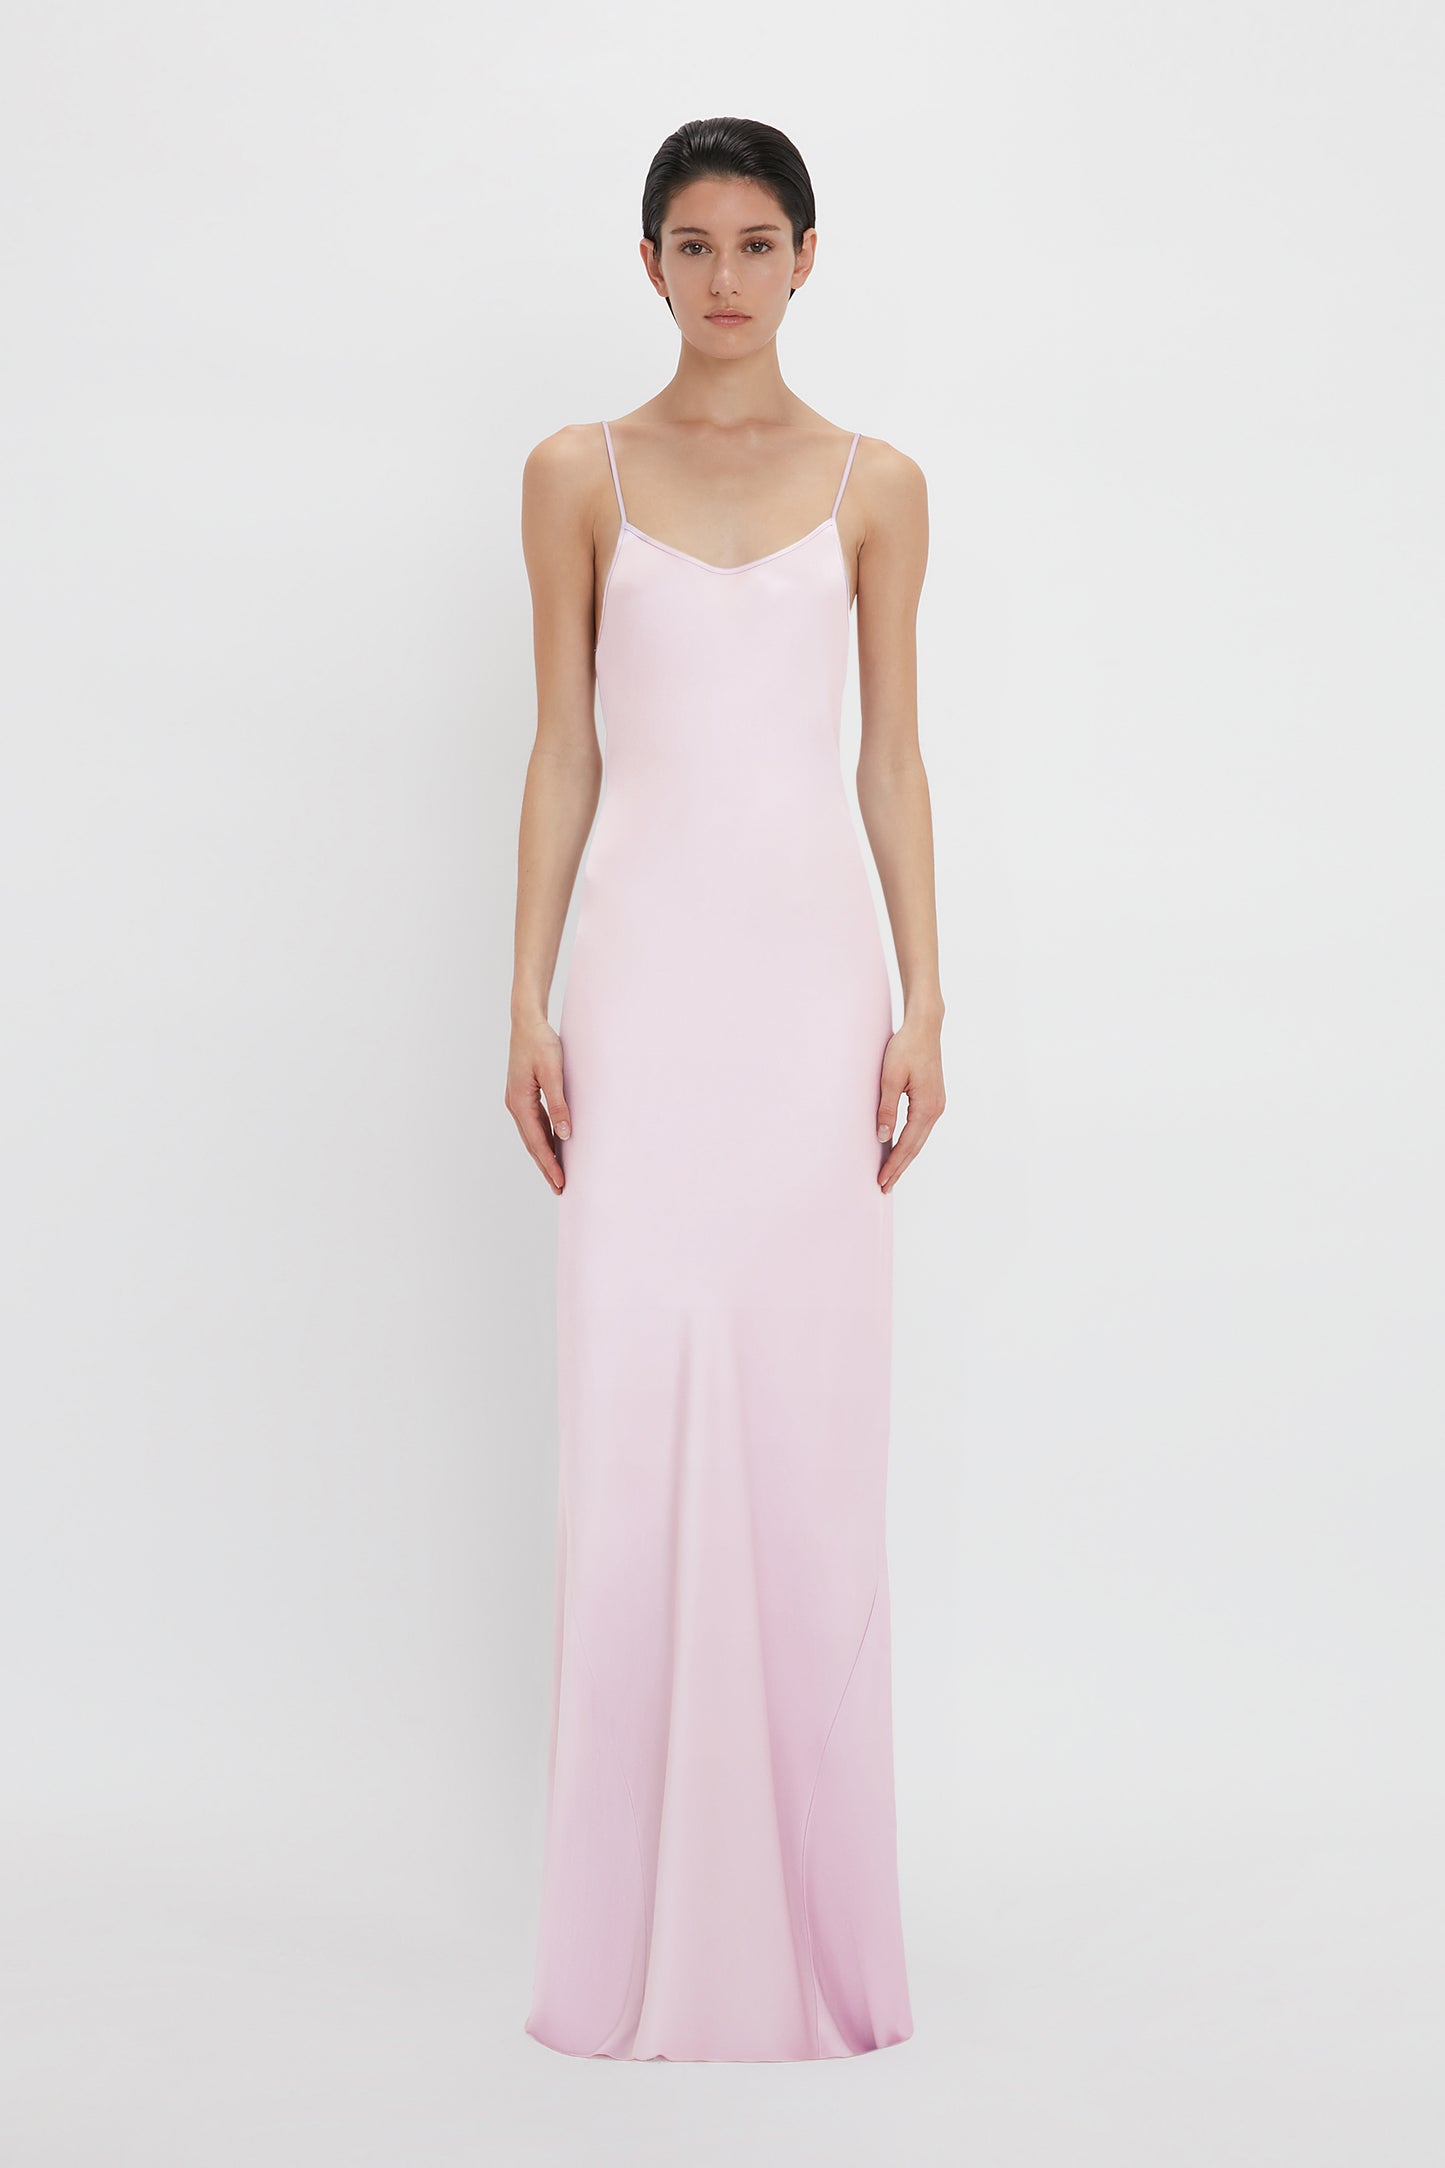 A woman in a Victoria Beckham Low Back Cami Floor-Length Dress In Rosa standing against a white background.